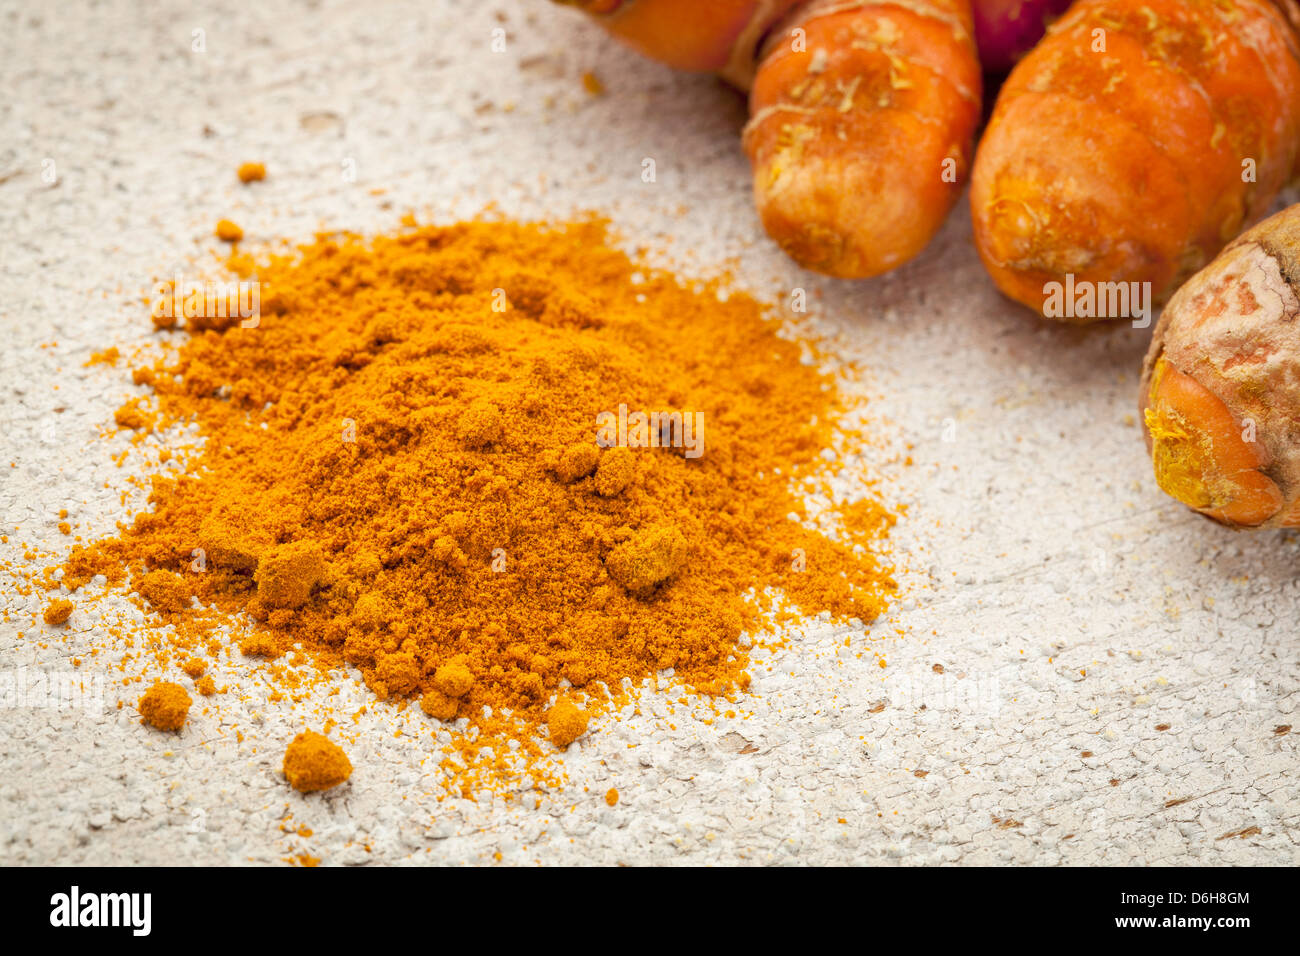 turmeric powder and root on a white painted rough barn wood surface Stock Photo